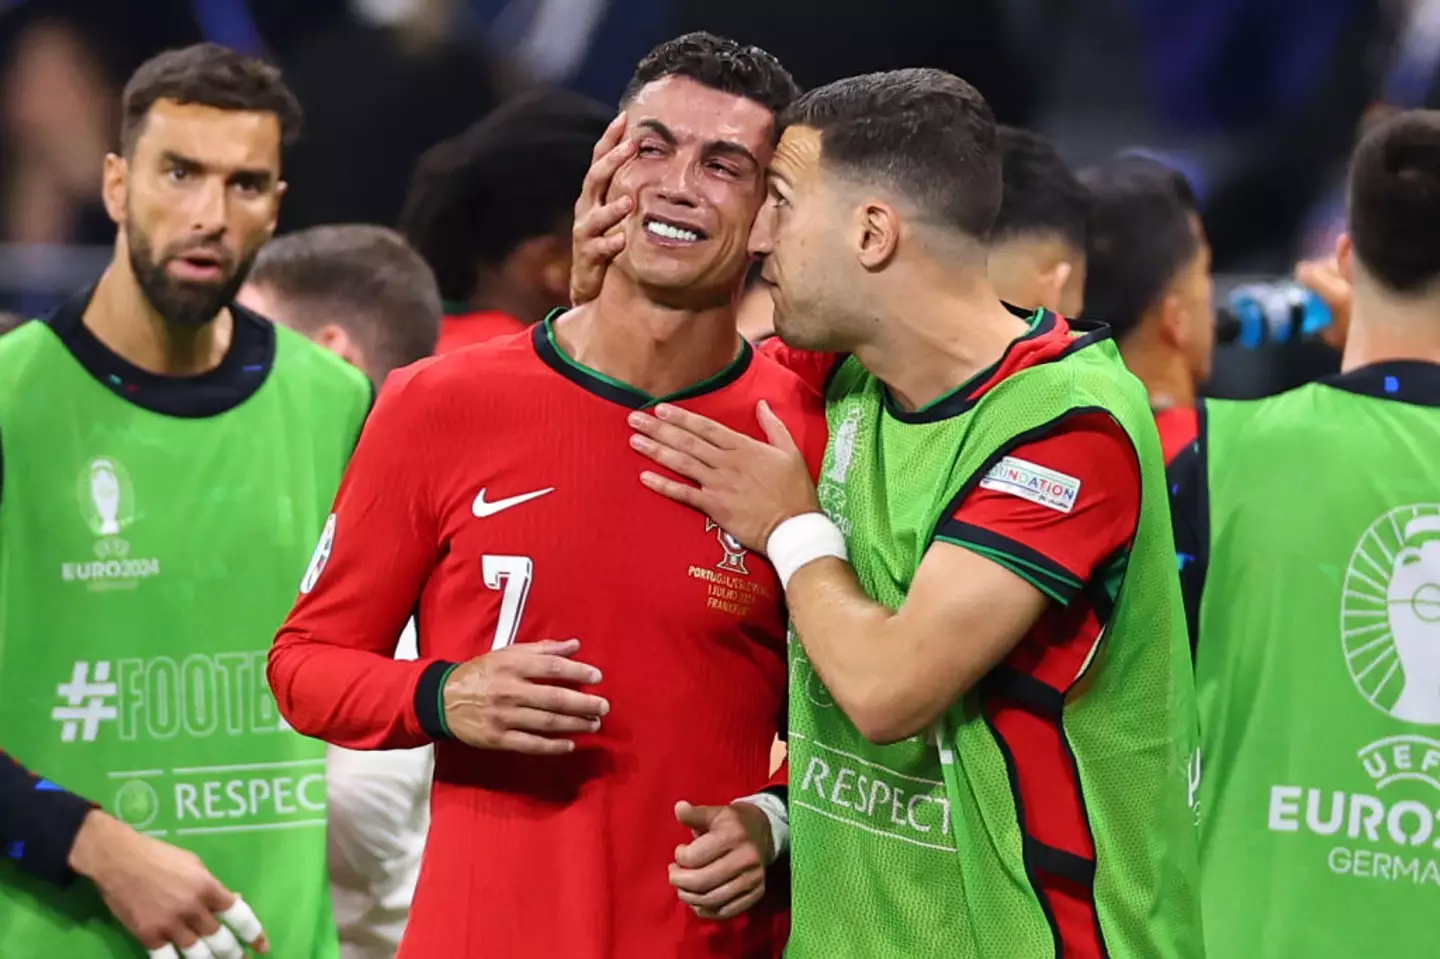 Cristiano Ronaldo couldn't hold back the tears after missing a penalty in the 105th minute that could have sealed Portugal's Euro 2024 progression. (Image: Getty)